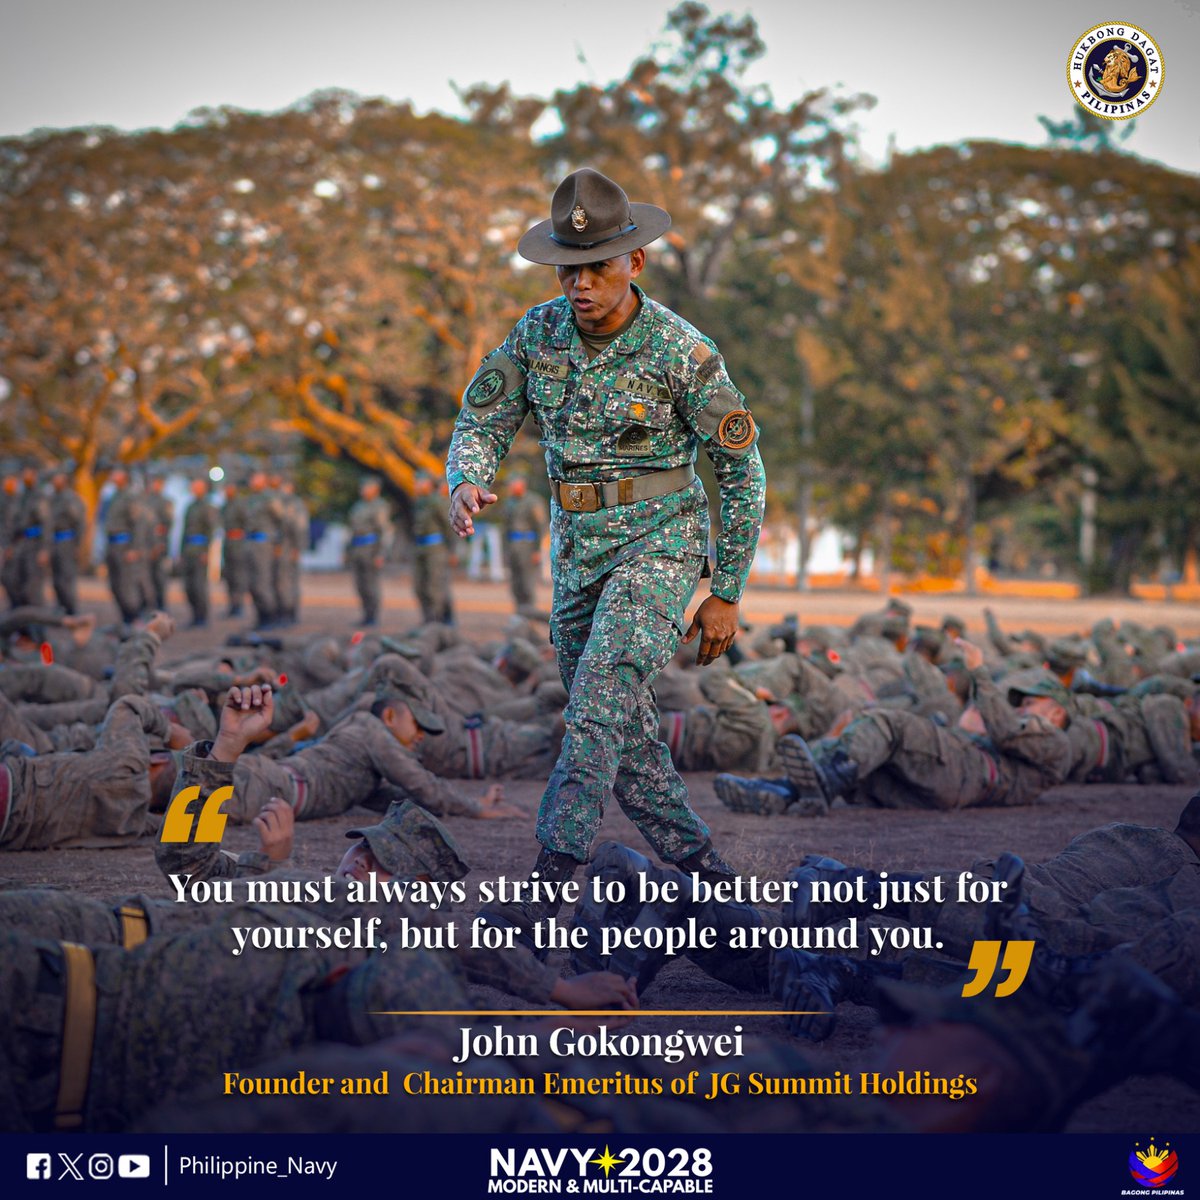 READ | The @Philippine_Navy's Leadership Quote for the Week. #ProtectingtheSeasSecuringOurFuture #ModernandMultiCapablePHNavy #AFPyoucanTRUST